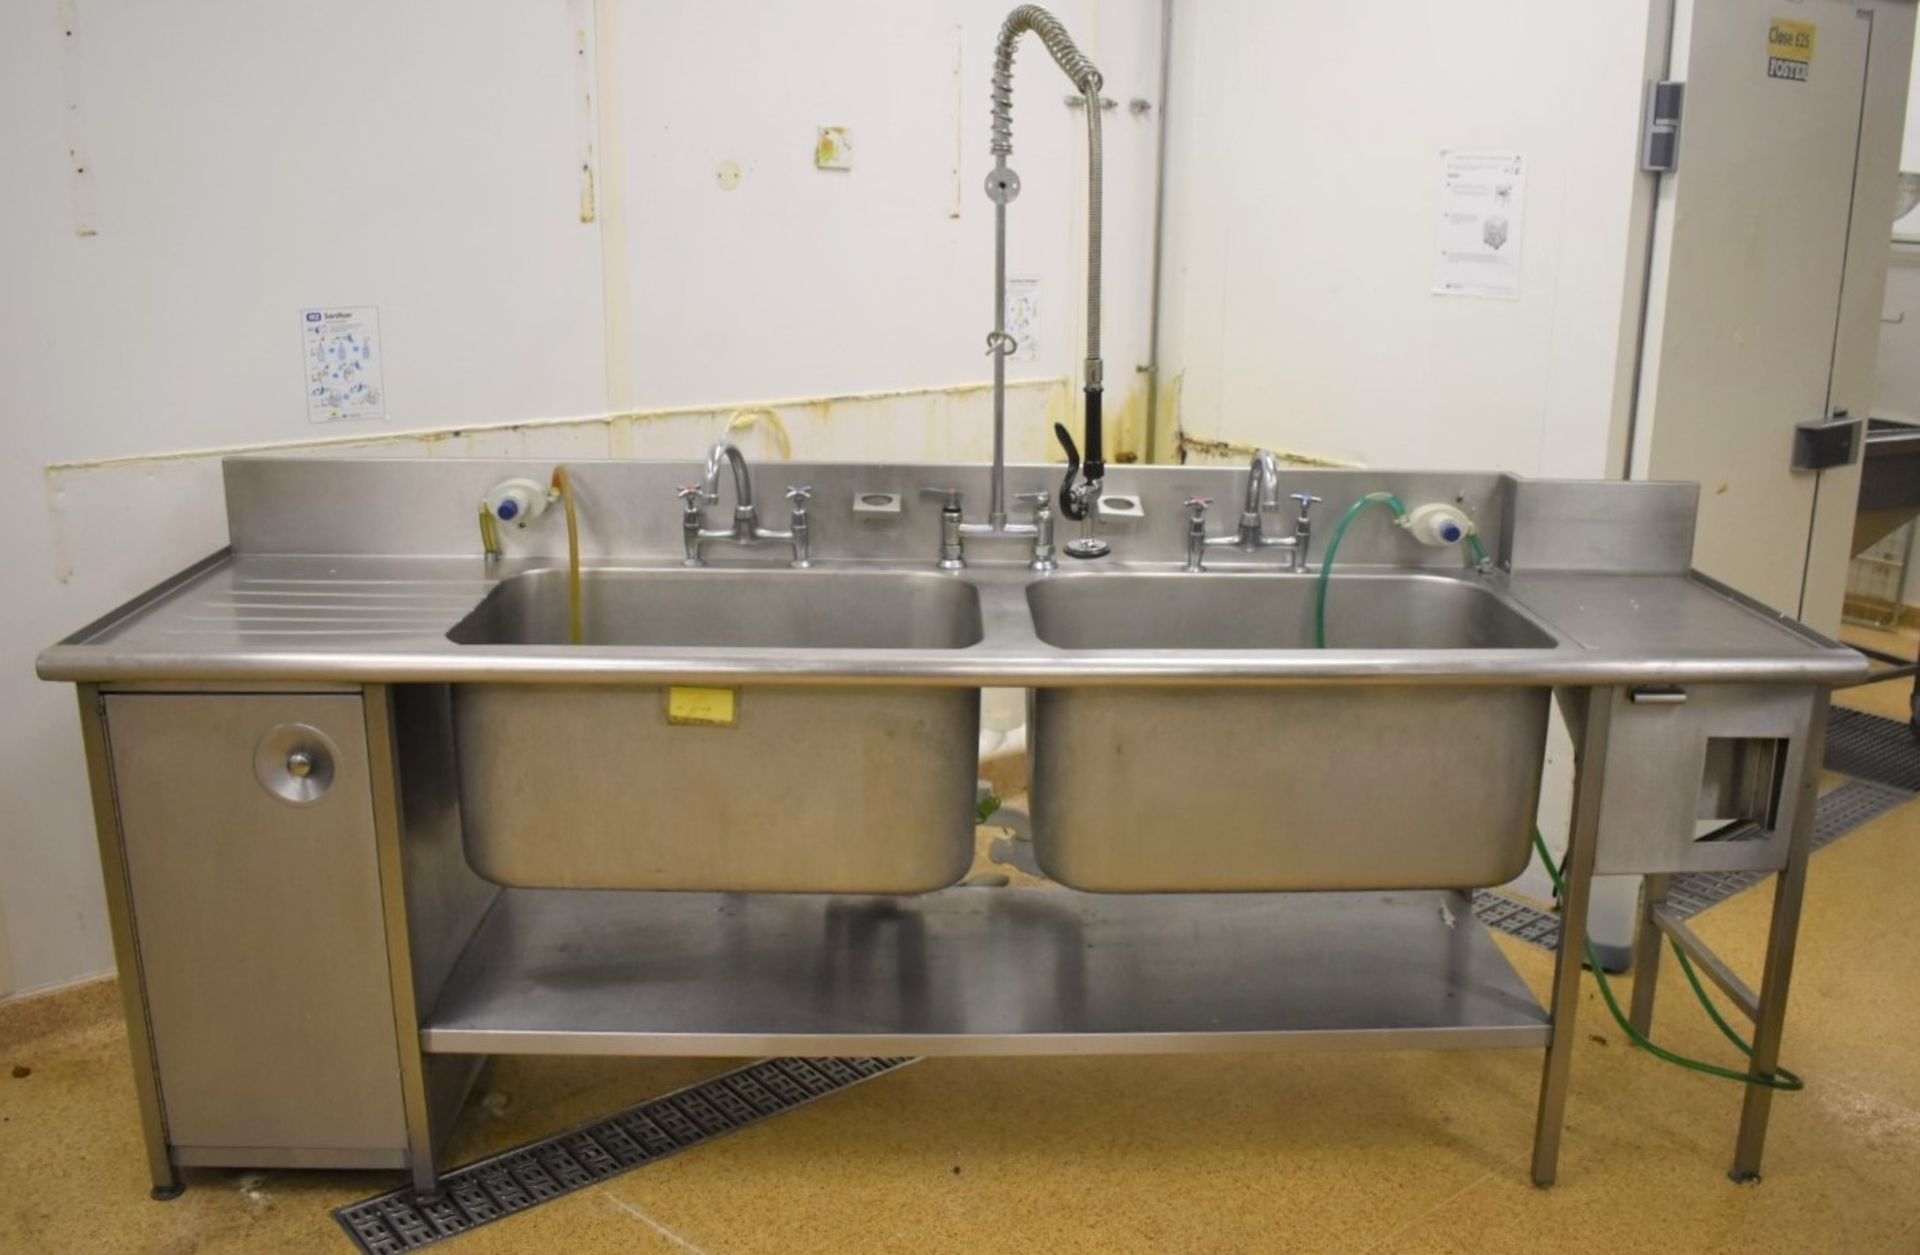 1 x Large Stainless Steel Wash Unit With Twin Deep Sink Basins, Hose Rinser Tap, Mixer Taps,